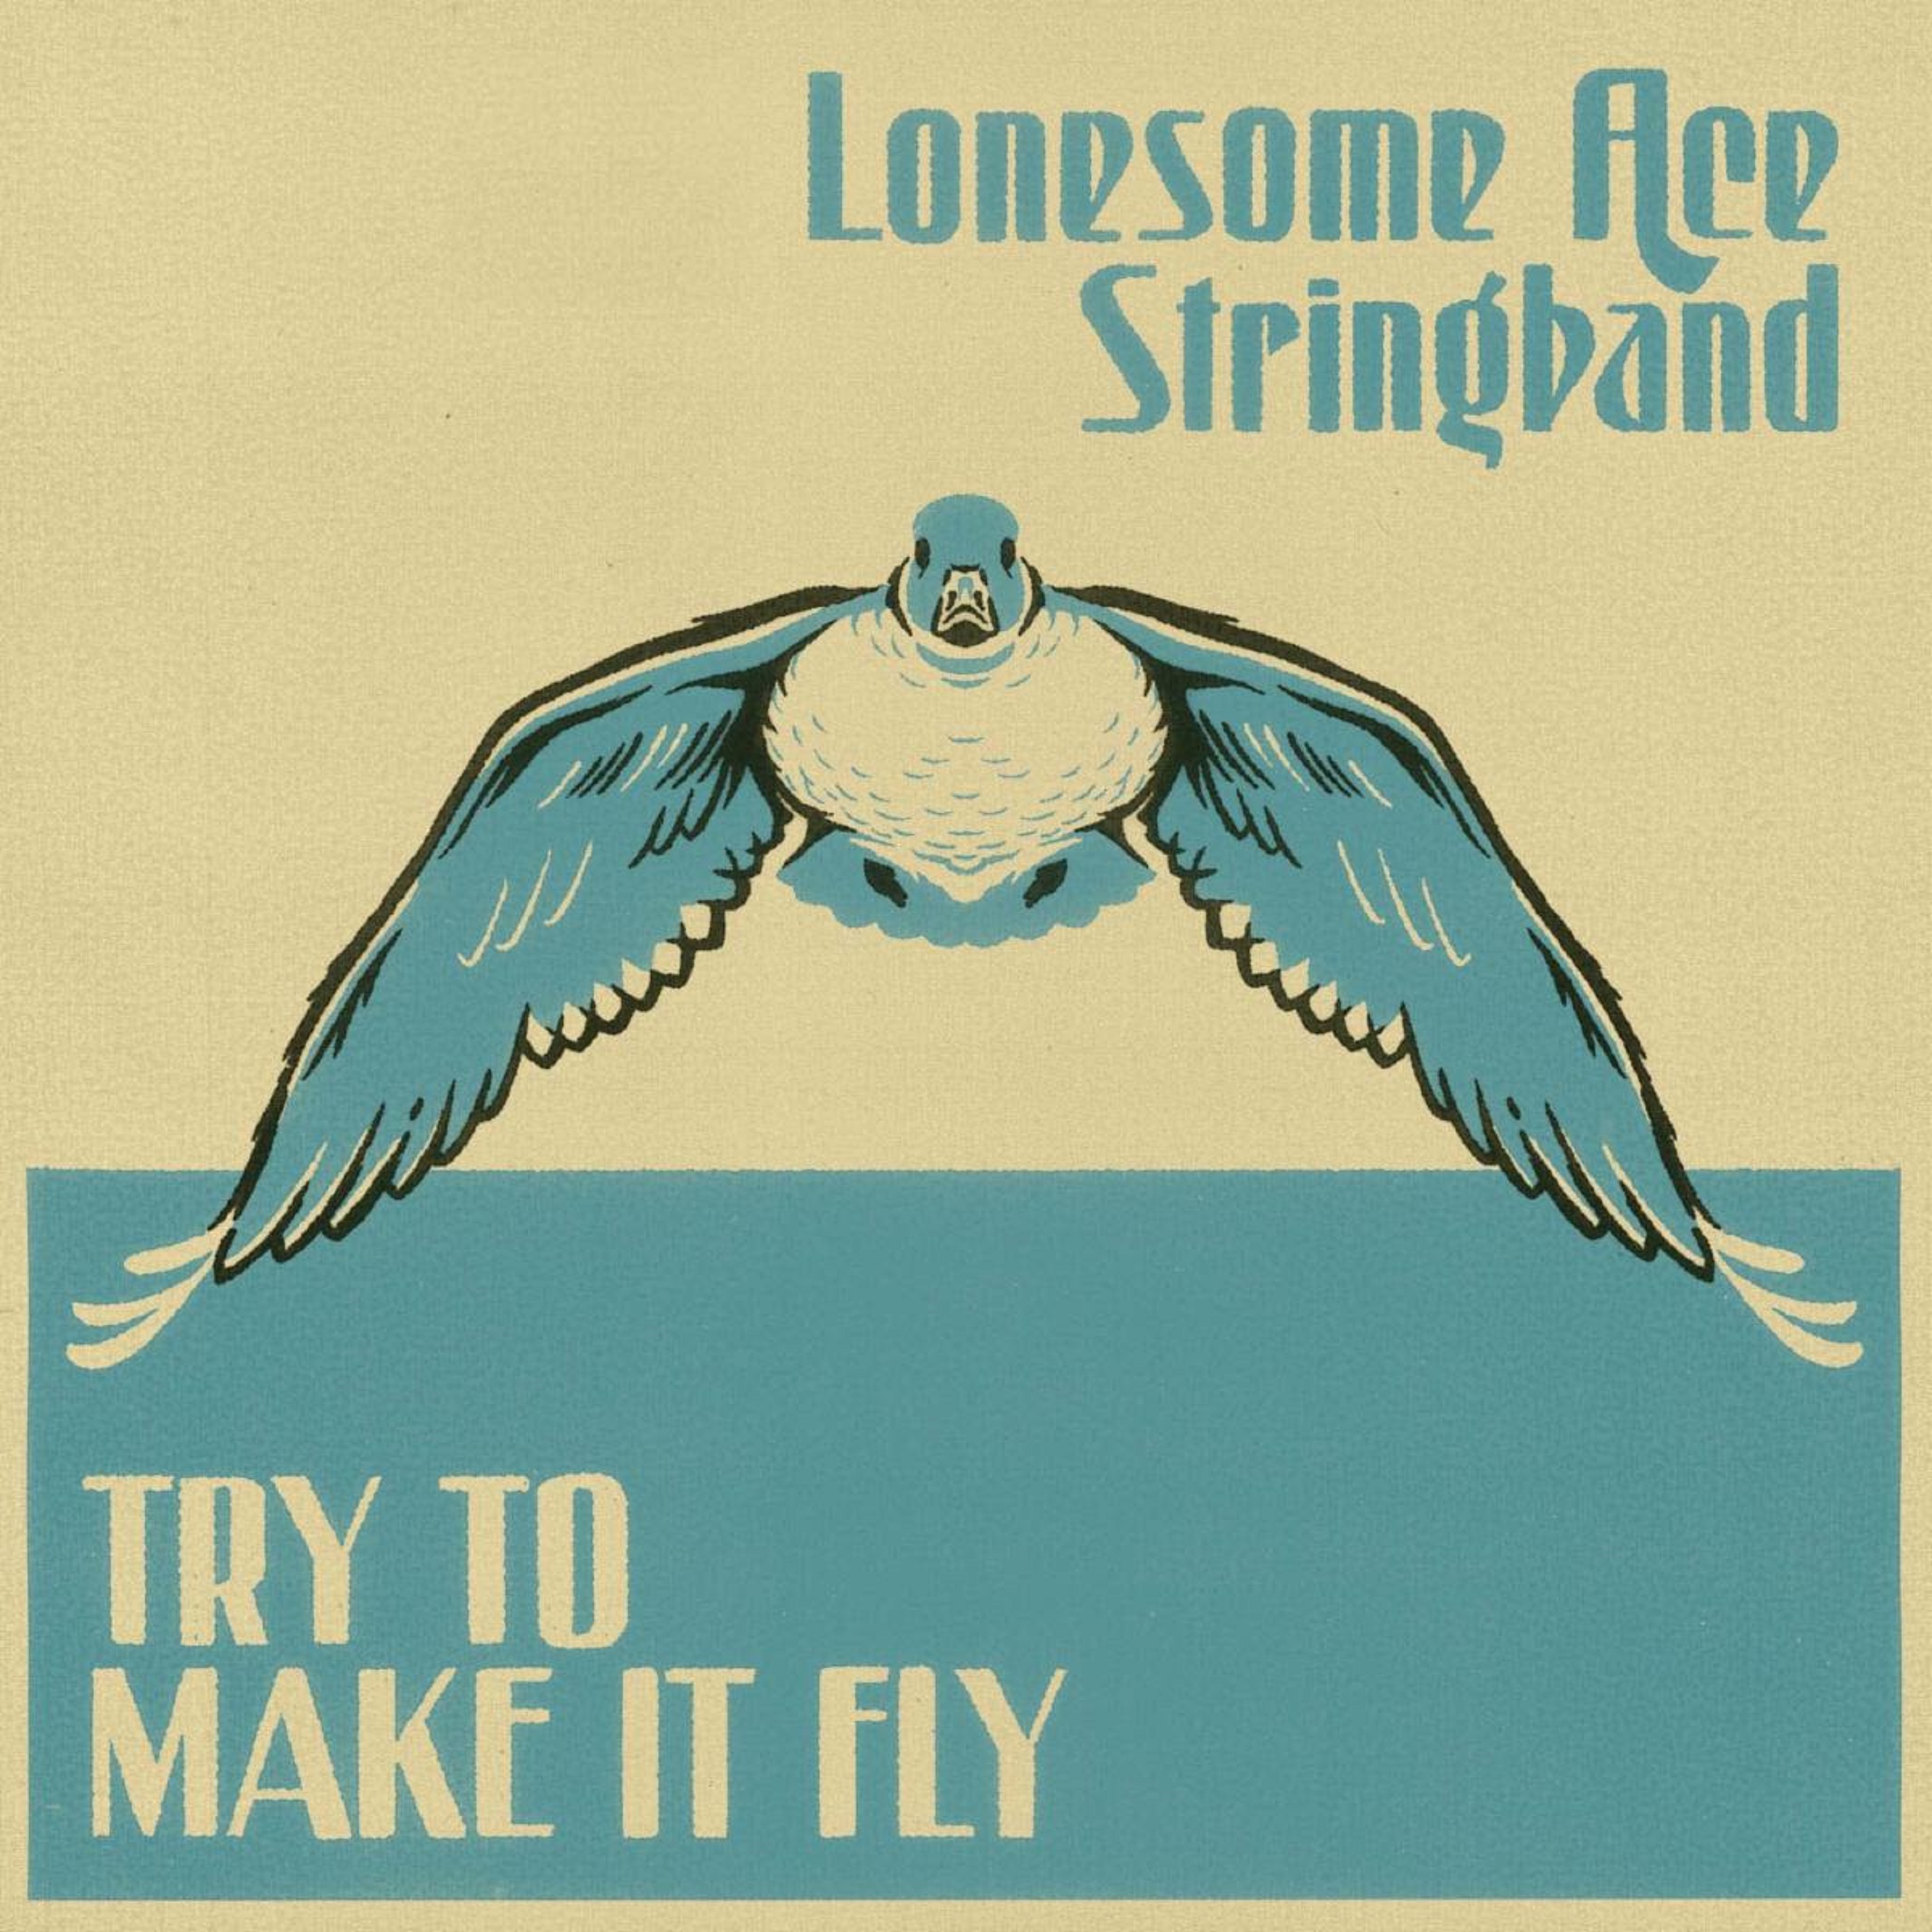 Lonesome Ace Stringband Steer Their Ship Toward A More Americana Heading With Brand New Album, Try To Make It Fly